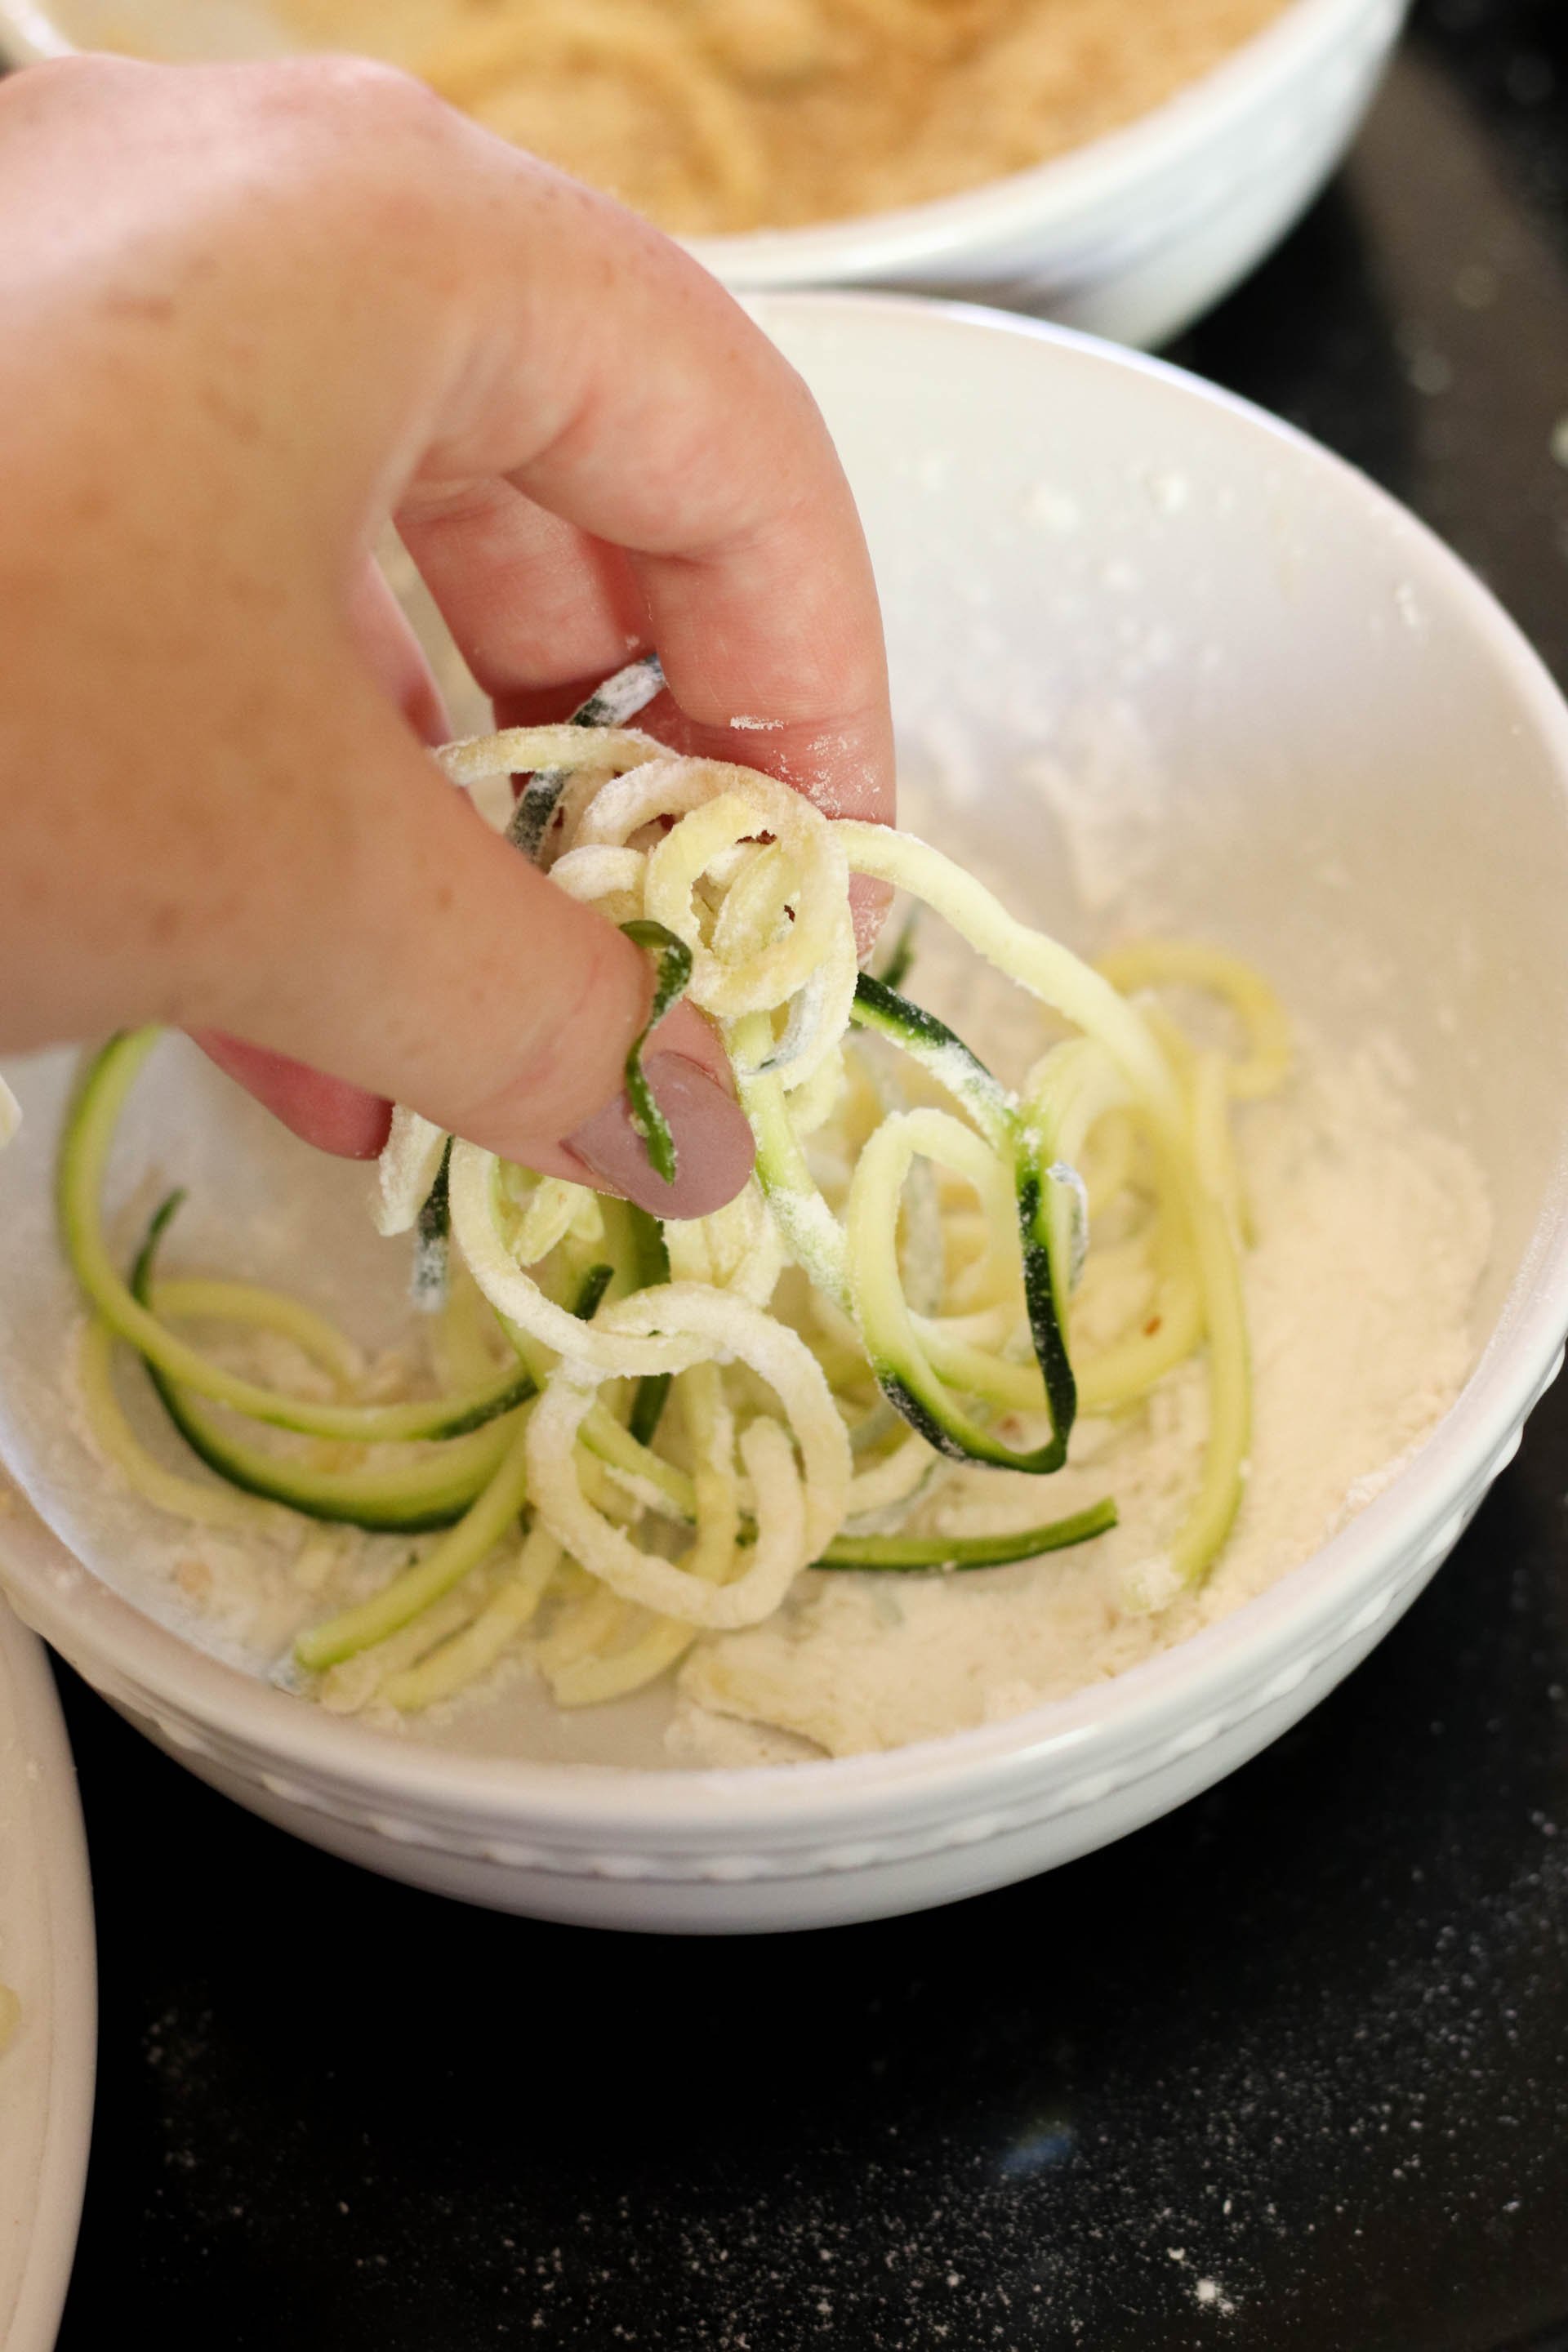 Dipping zucchini strings in flour